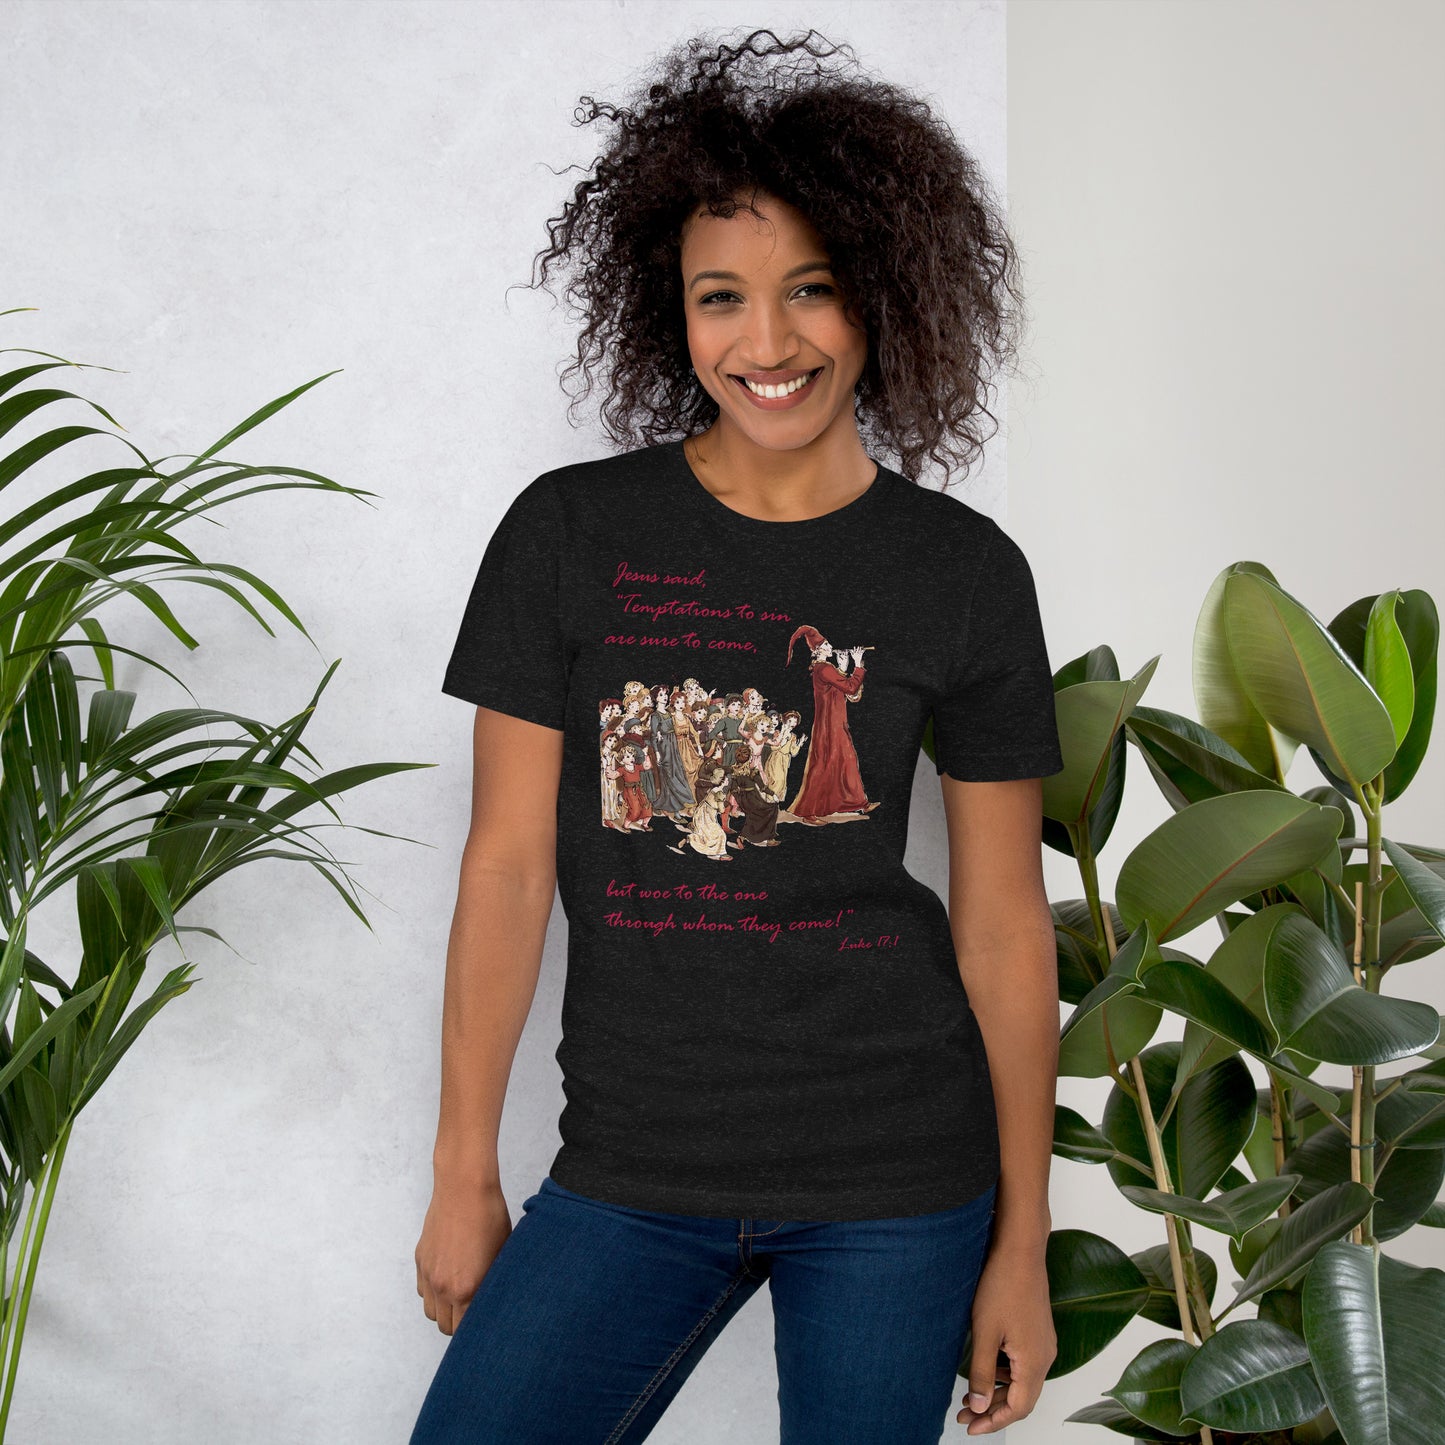 A007 T-shirt - Bella + Canvas 3001 Unisex T-shirt Featuring Luke 17:1 With a Graphic Depiction of the Pied Piper Leading a Mesmerized Crowd.